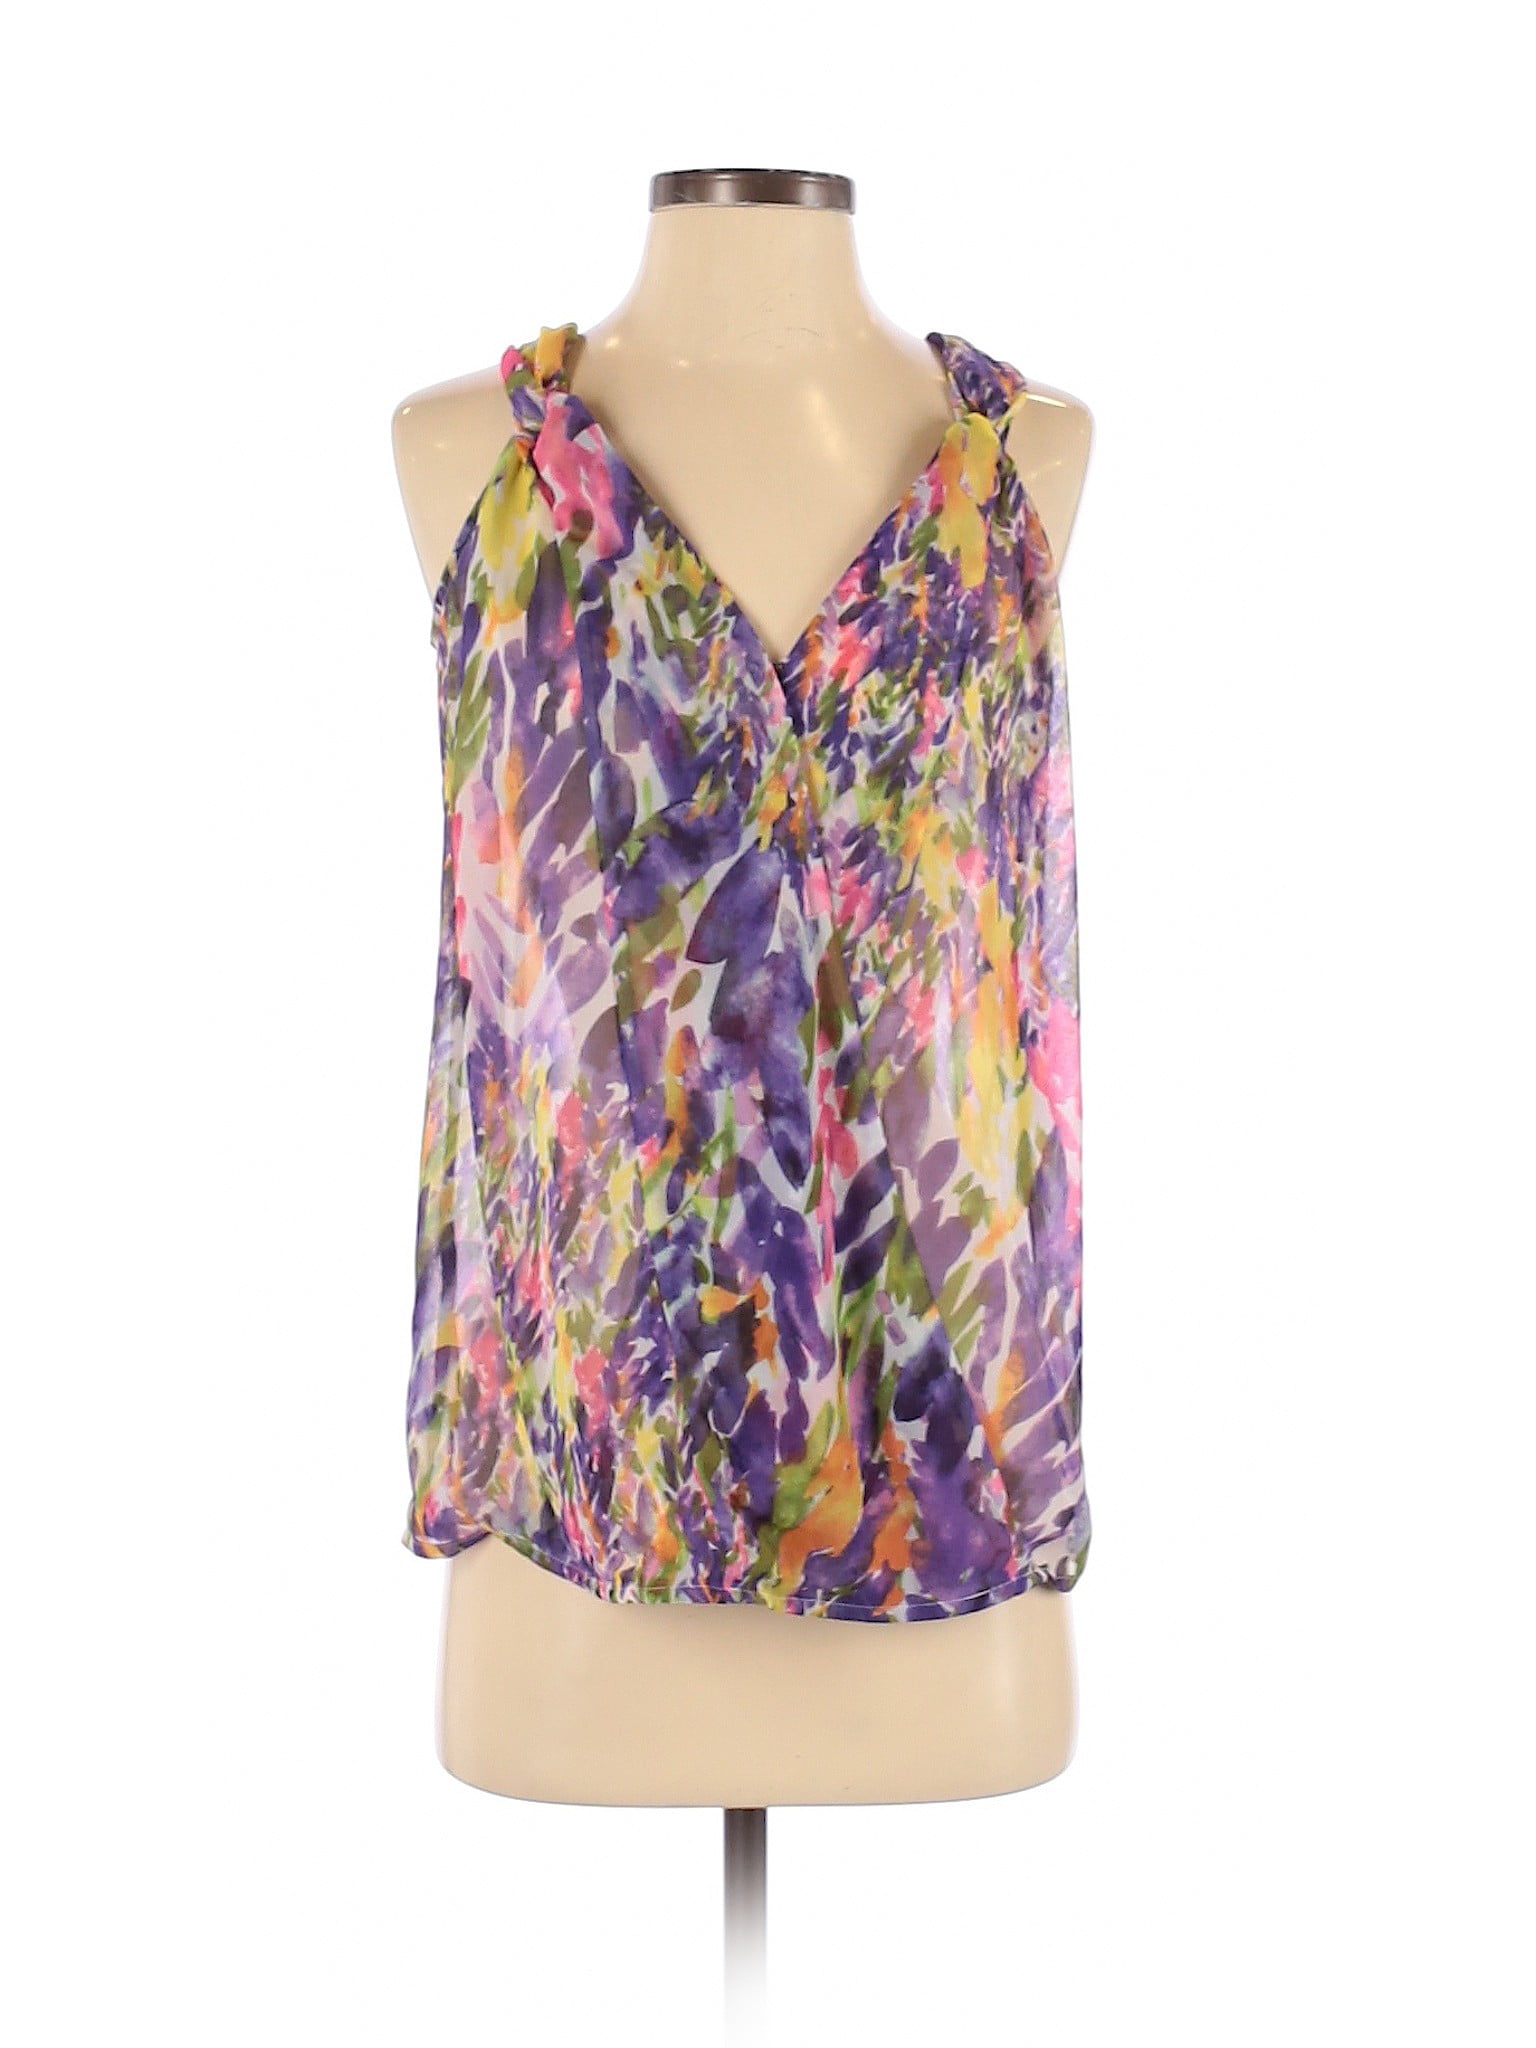 cabi Clothing - Pre-Owned CAbi Women's Size XS Sleeveless Blouse ...